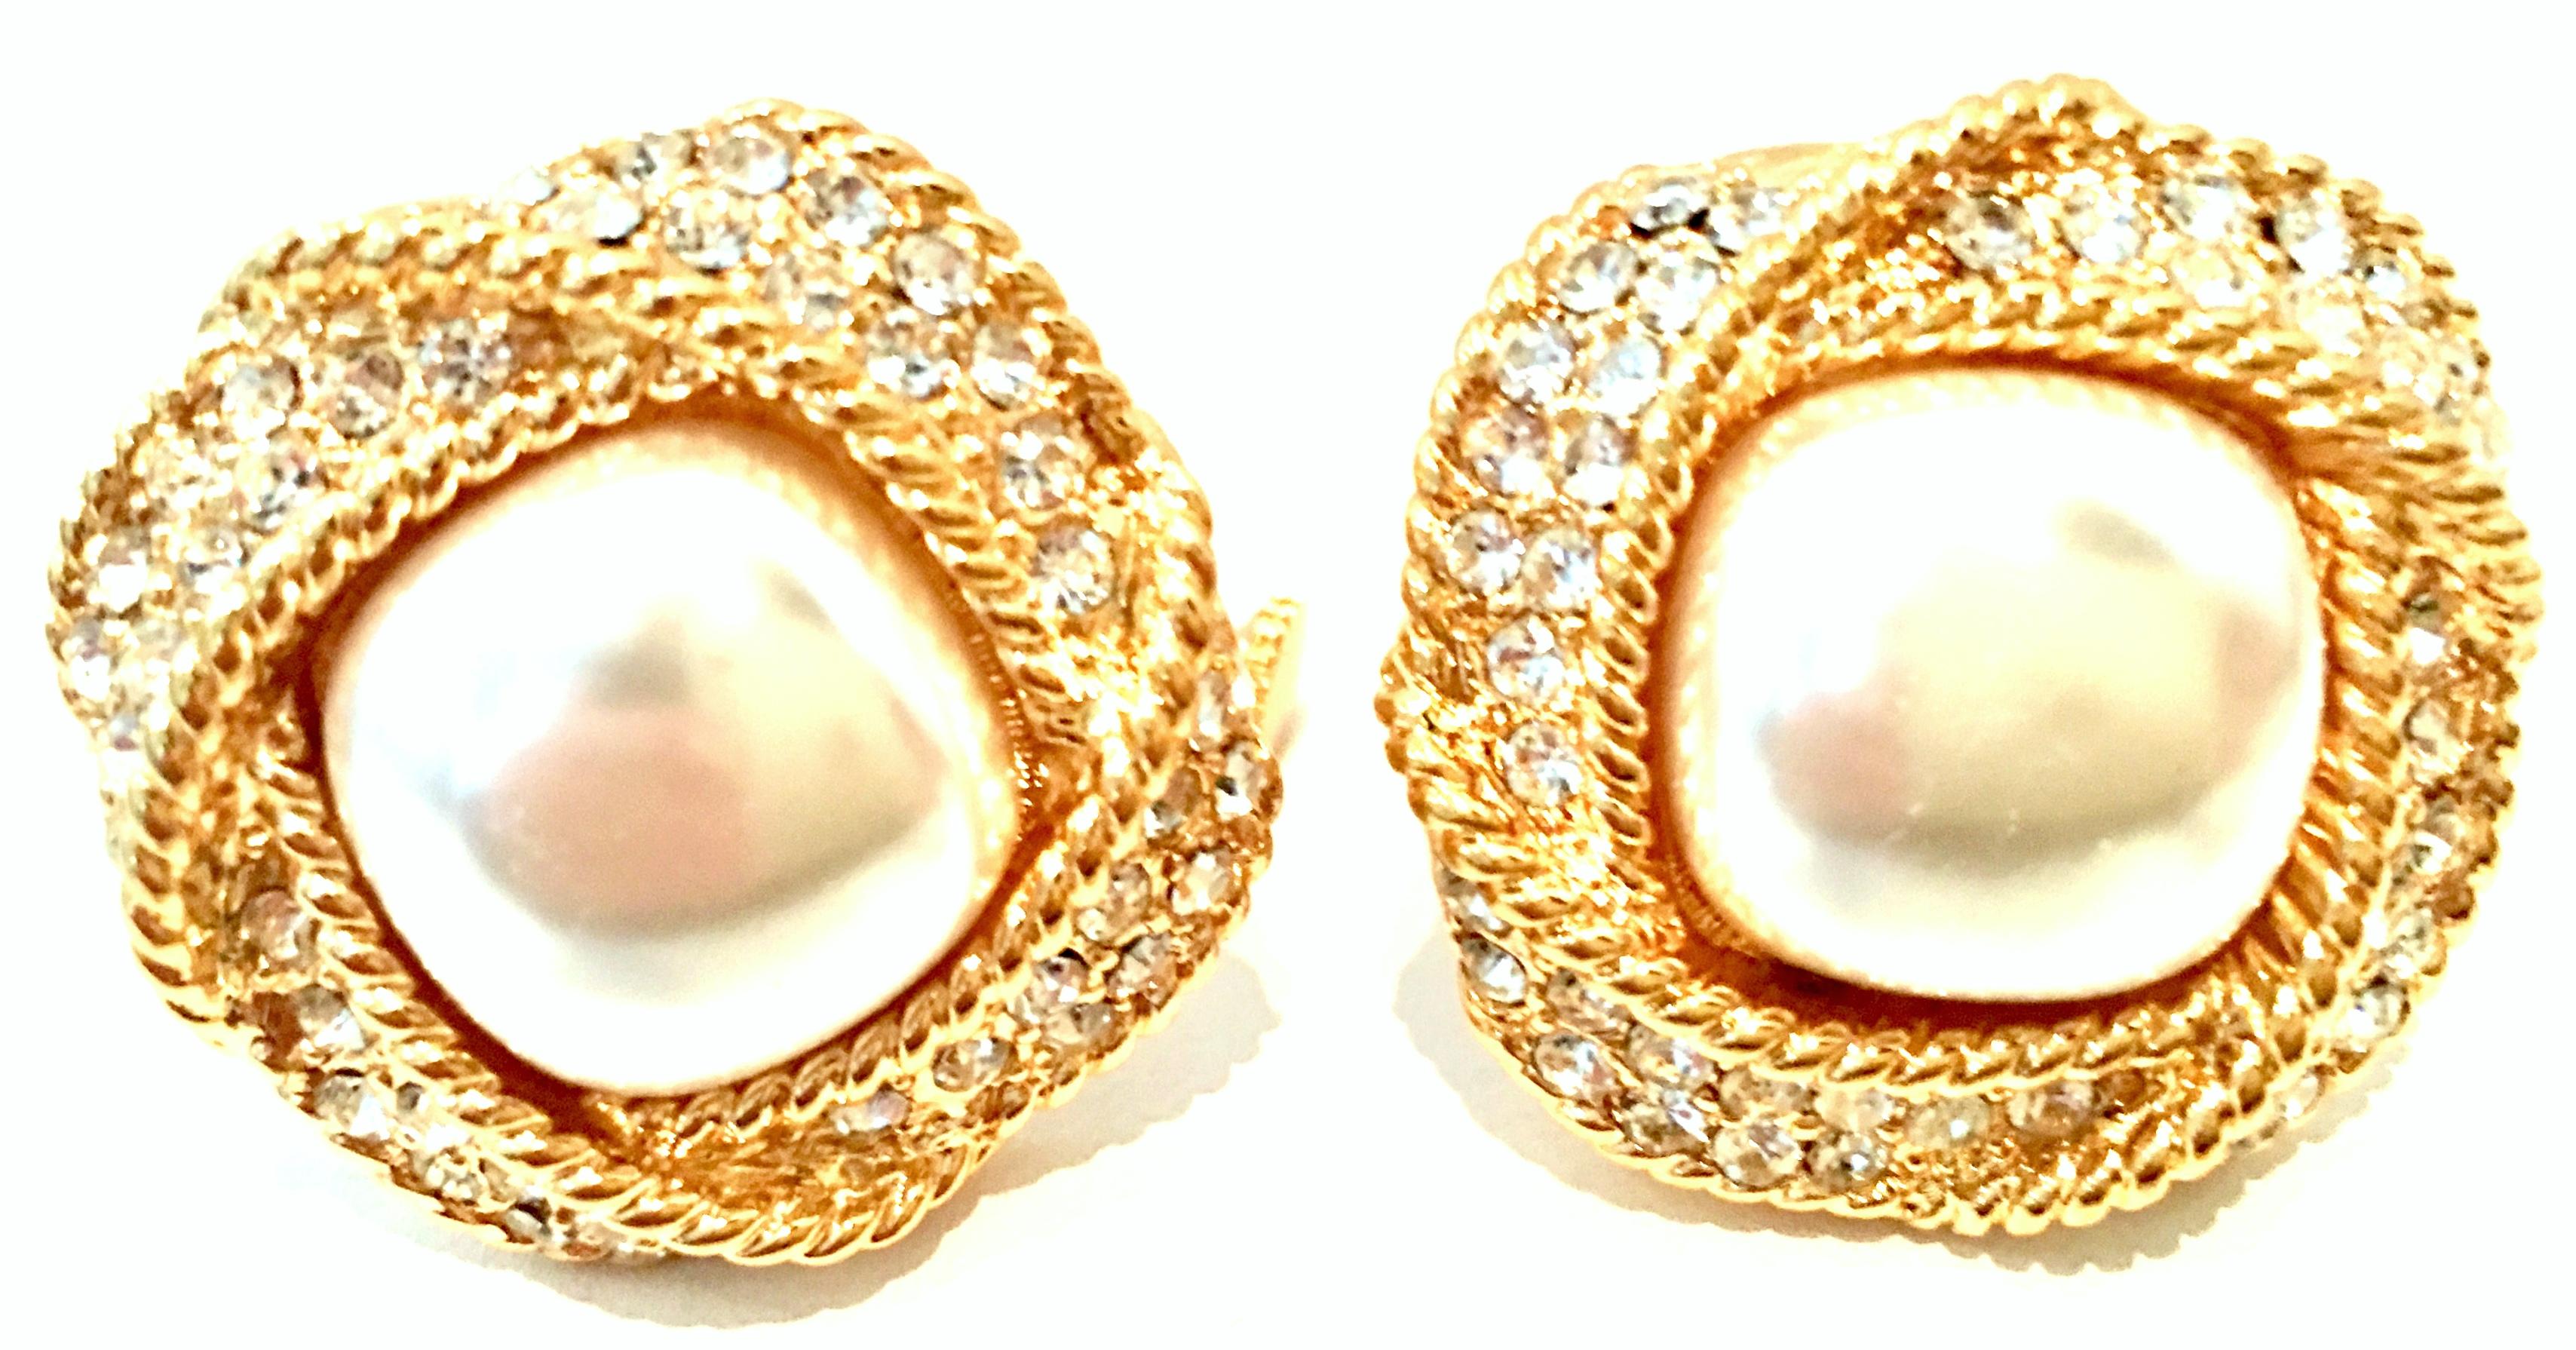 20th Century Pair Of Gold Plate, Faux Pearl & Austrian Crystal Dimensional Earrings By, Napier. These finely crafted gold plate dimensional pair of Napier earrings features a central large white faux pearl, surrounded by brilliant cut and faceted